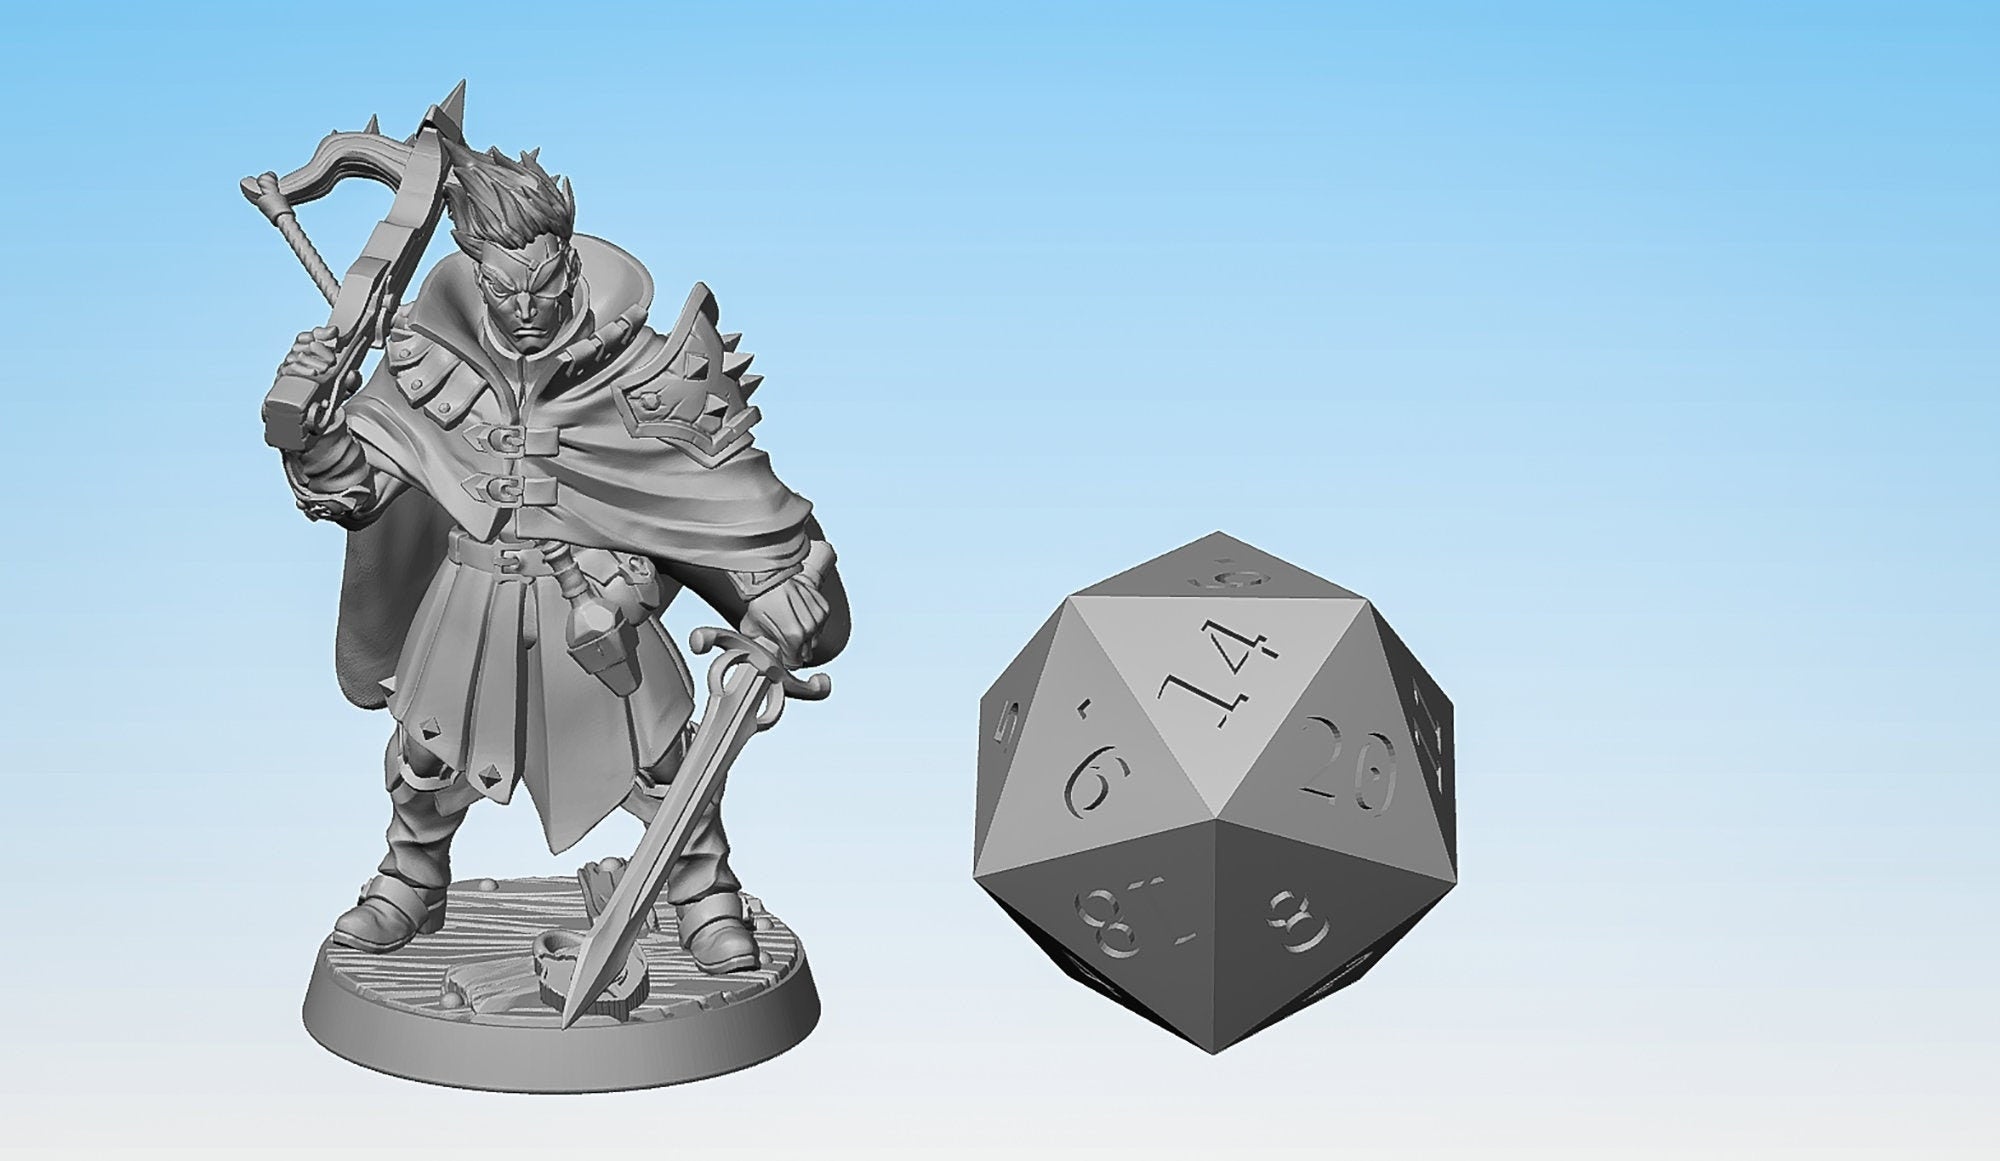 BANDIT THIEF (2 versions) "Aaron Blacksparrow" | Dungeons and Dragons | DnD | Pathfinder | Tabletop | RPG | Hero Size | 28 mm-Role Playing Miniatures